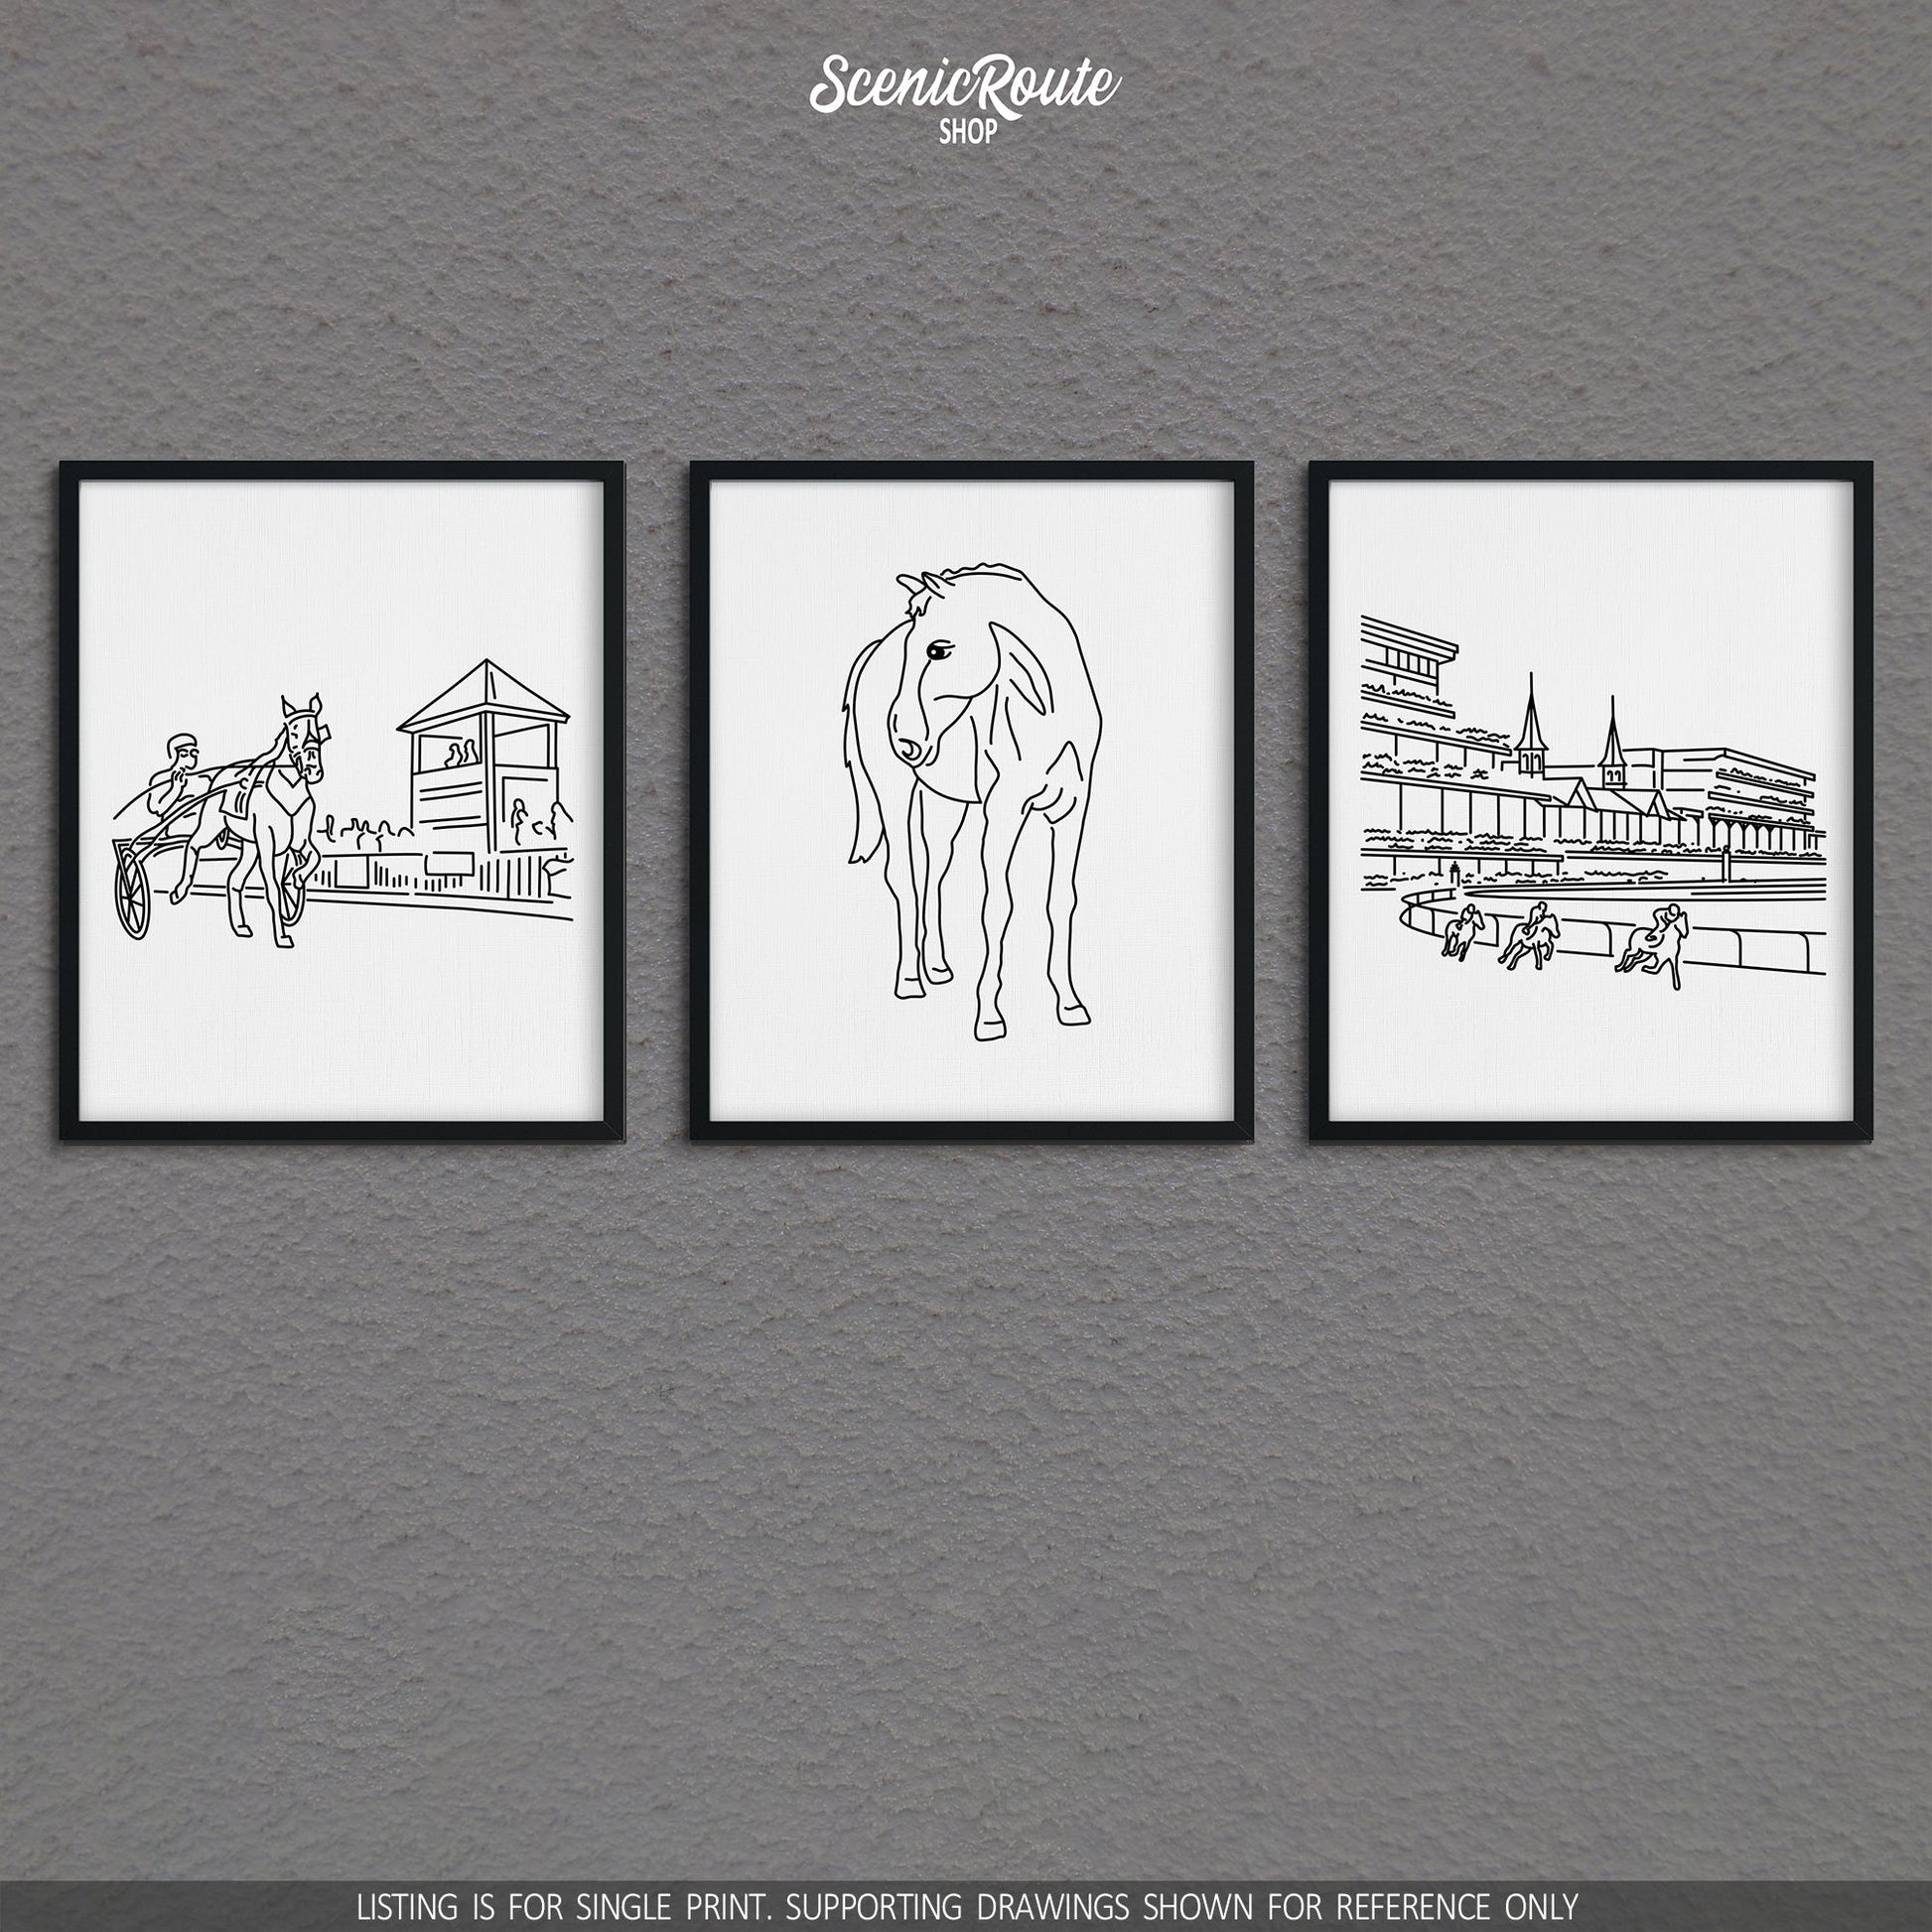 A group of three framed drawings on a gray wall. The line art drawings include Harness Racing, a Horse, and Churchill Downs